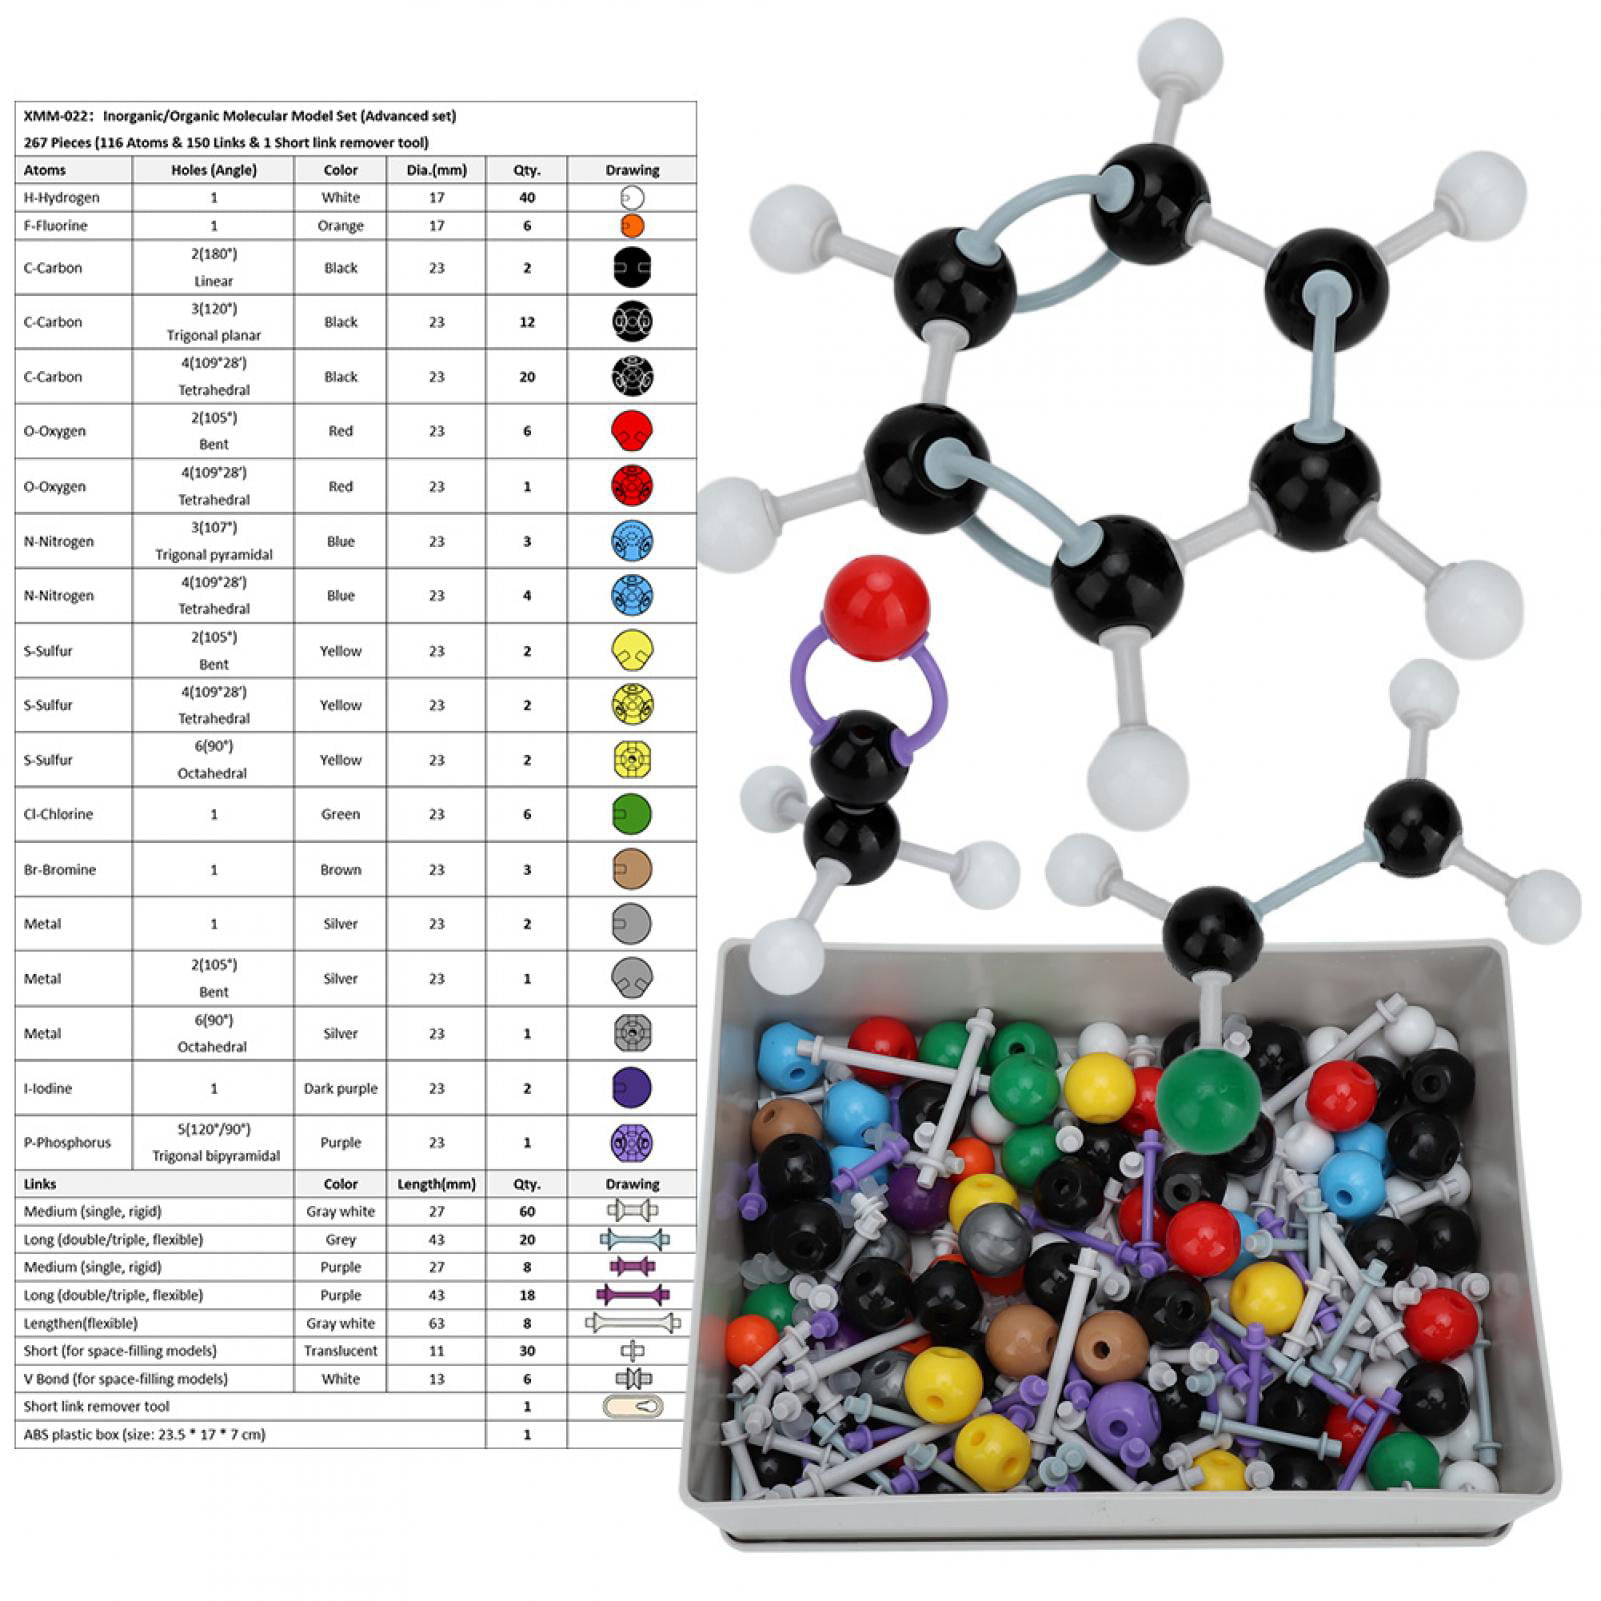 239 Pieces Bonds and Instructional Guide Organic Chemistry Kit and Periodic Table of Elements Molecular Model Student or Teacher Pack with Atoms 